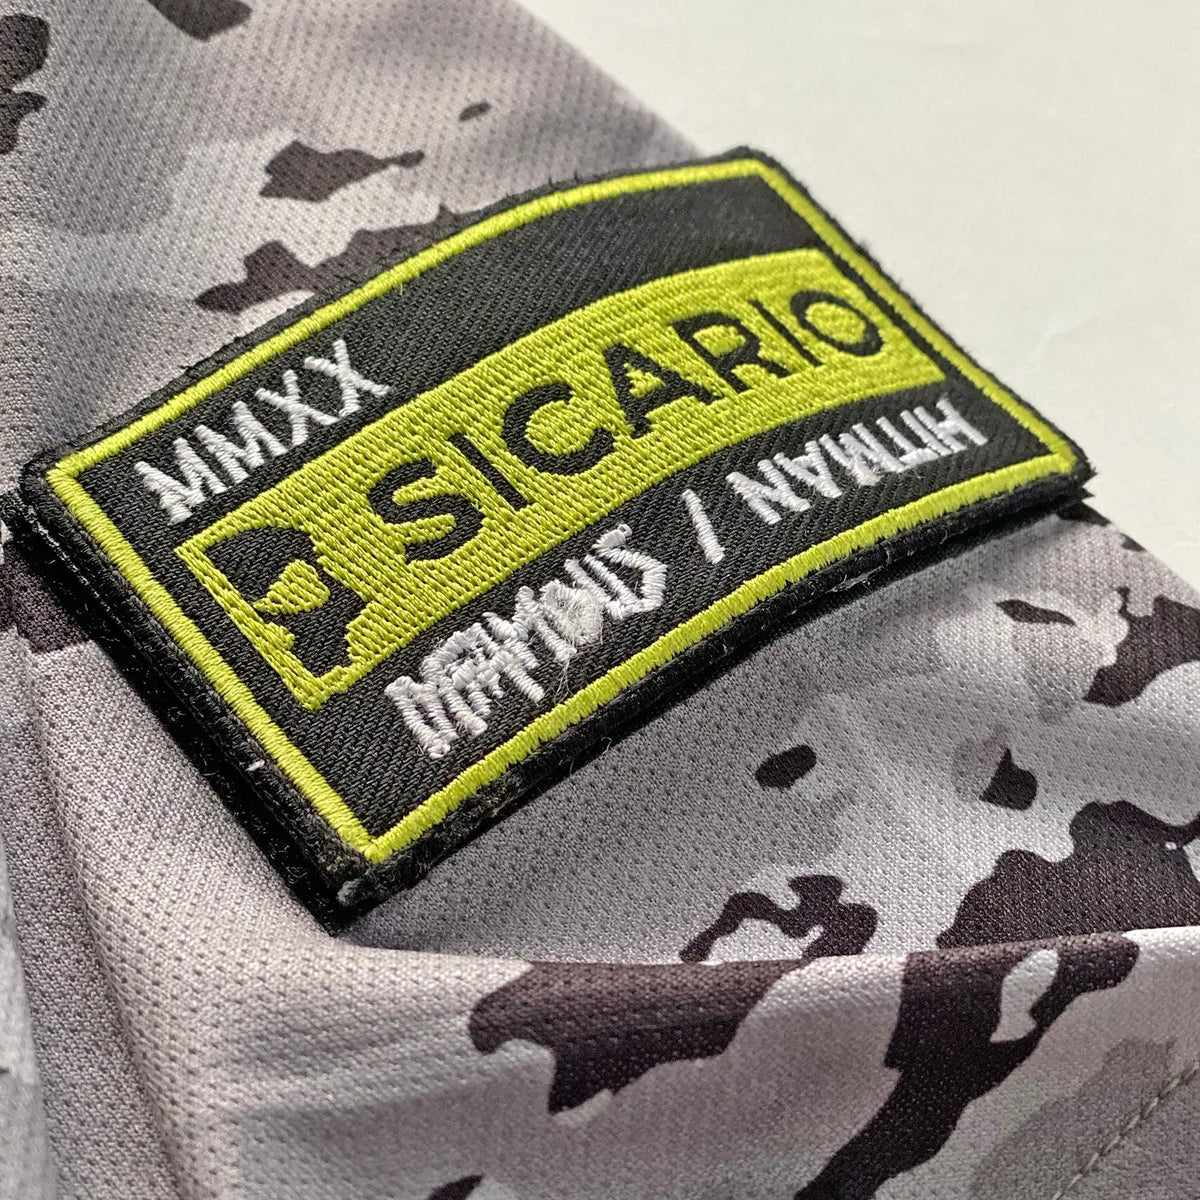 Sicario Member Package Infamous Paintball